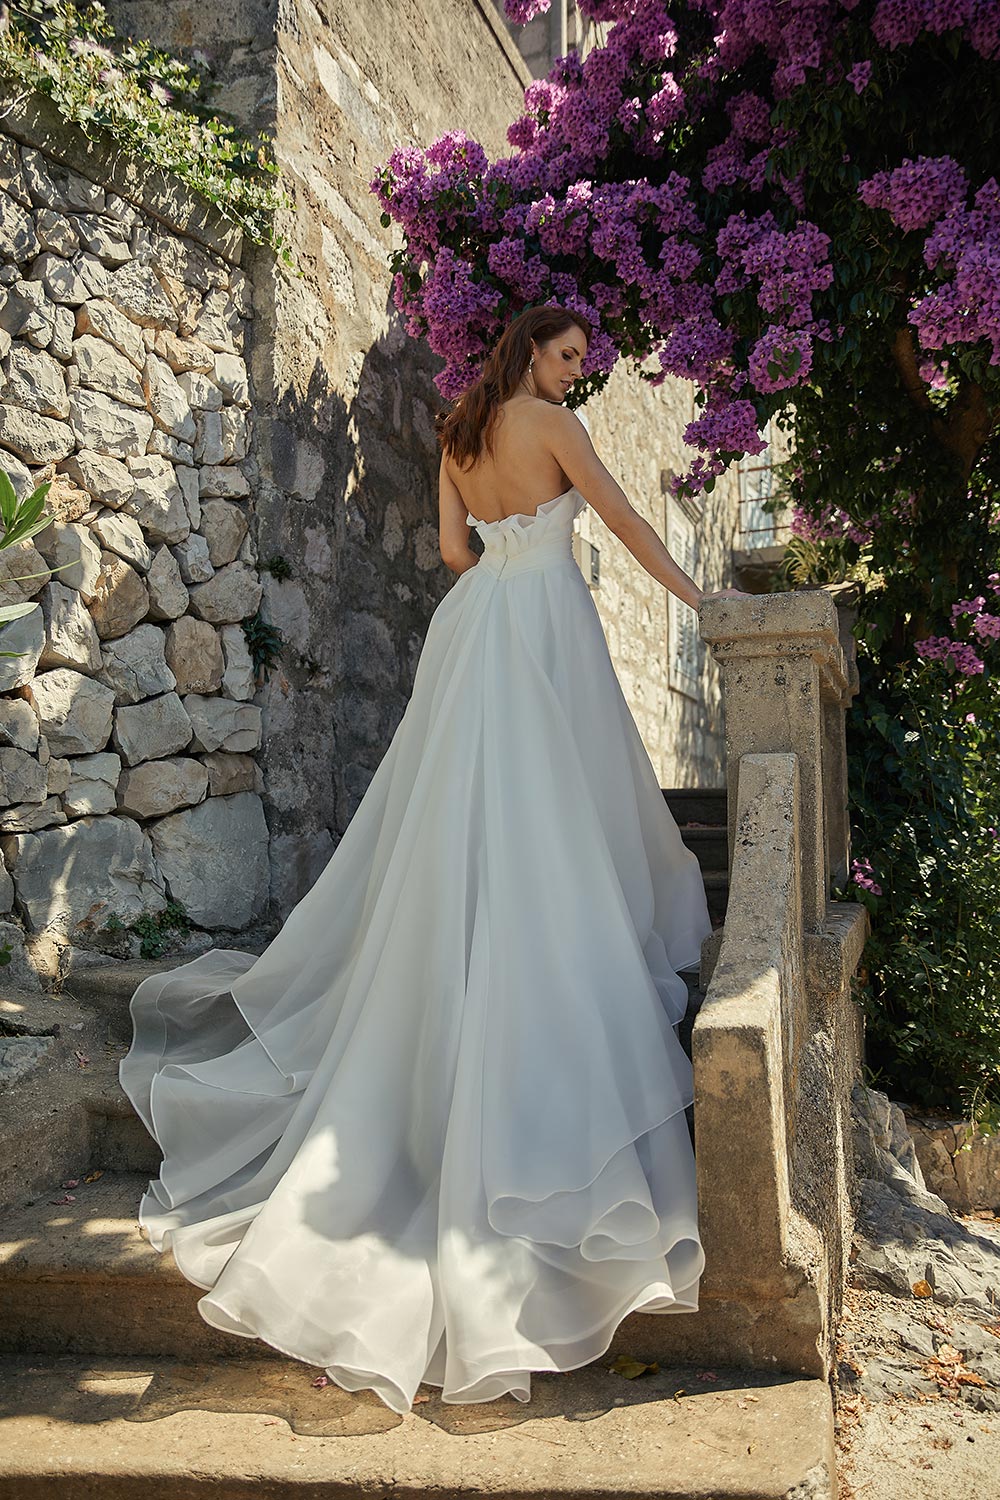 Rosana - bridal gown that embodies timeless elegance. Features satin organza, a strapless bodice, sweeping train, and hand-crafted rosette. By Vinka Design